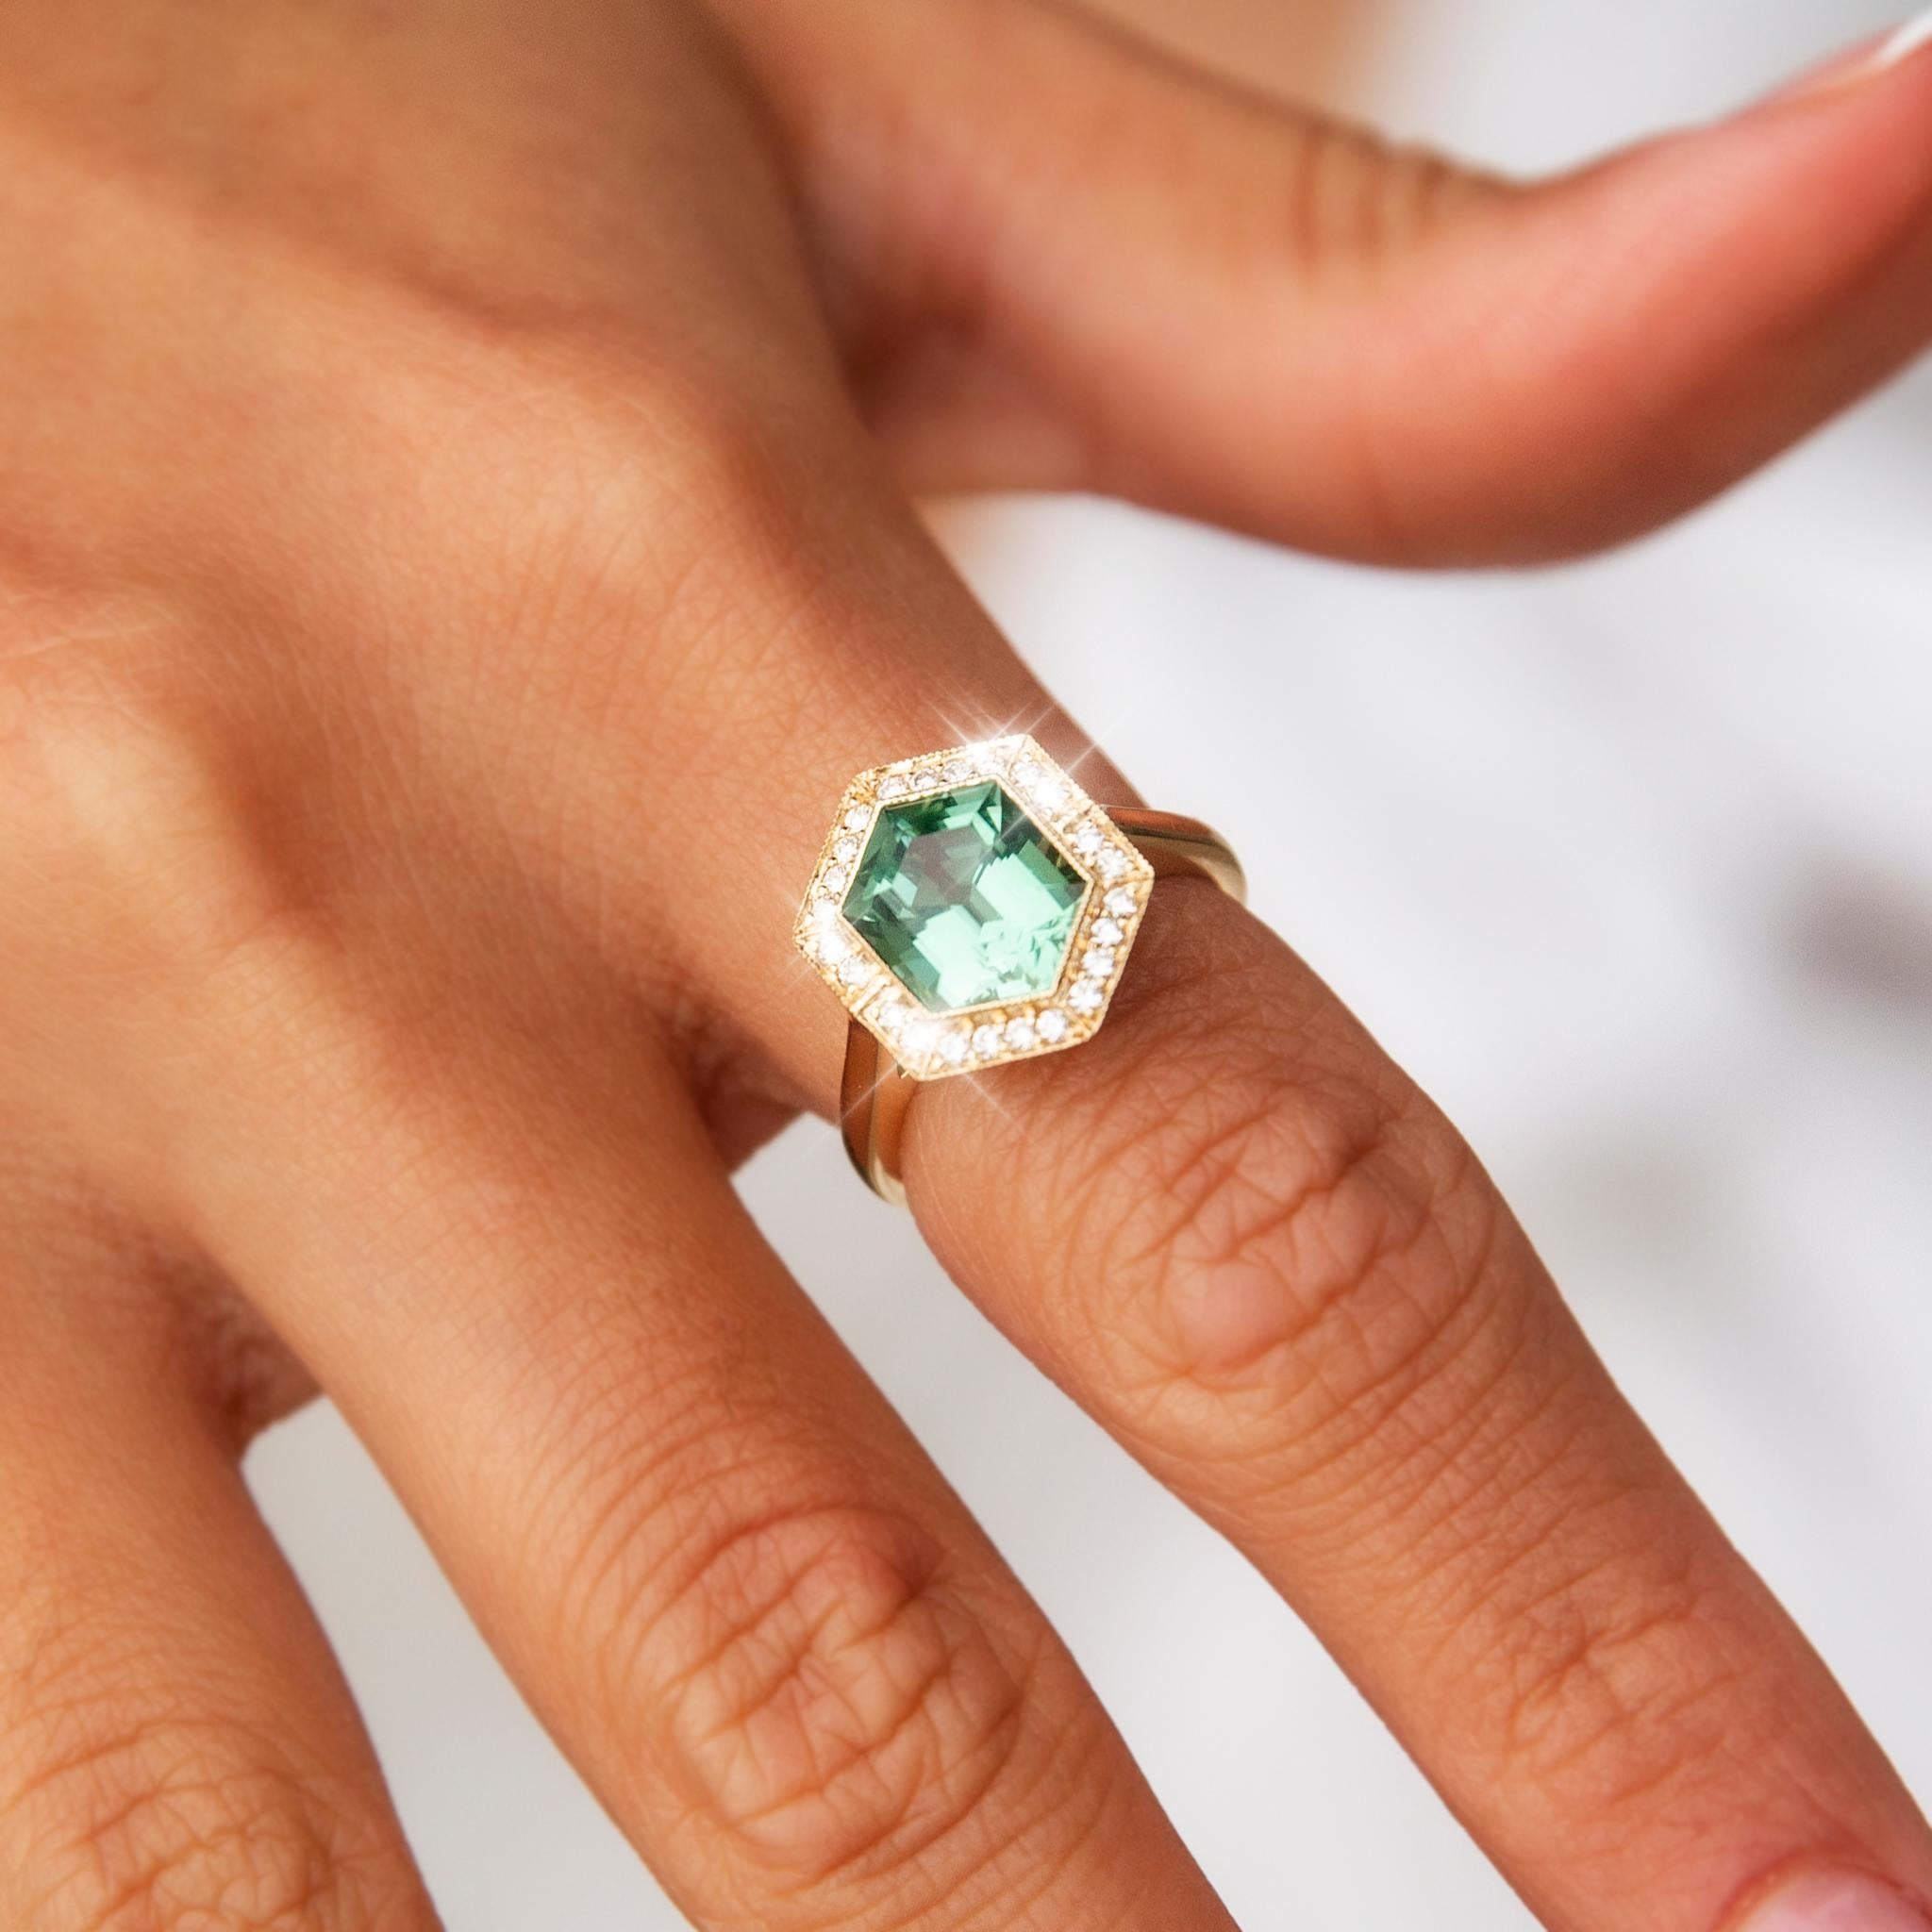 Crafted with love and care in 18 carat yellow gold, this lovely contemporary ring features a gorgeous mint green hexagonal cut tourmaline at the centre of an elegant basket setting with a gleaming border of bead set round brilliant and princess cut